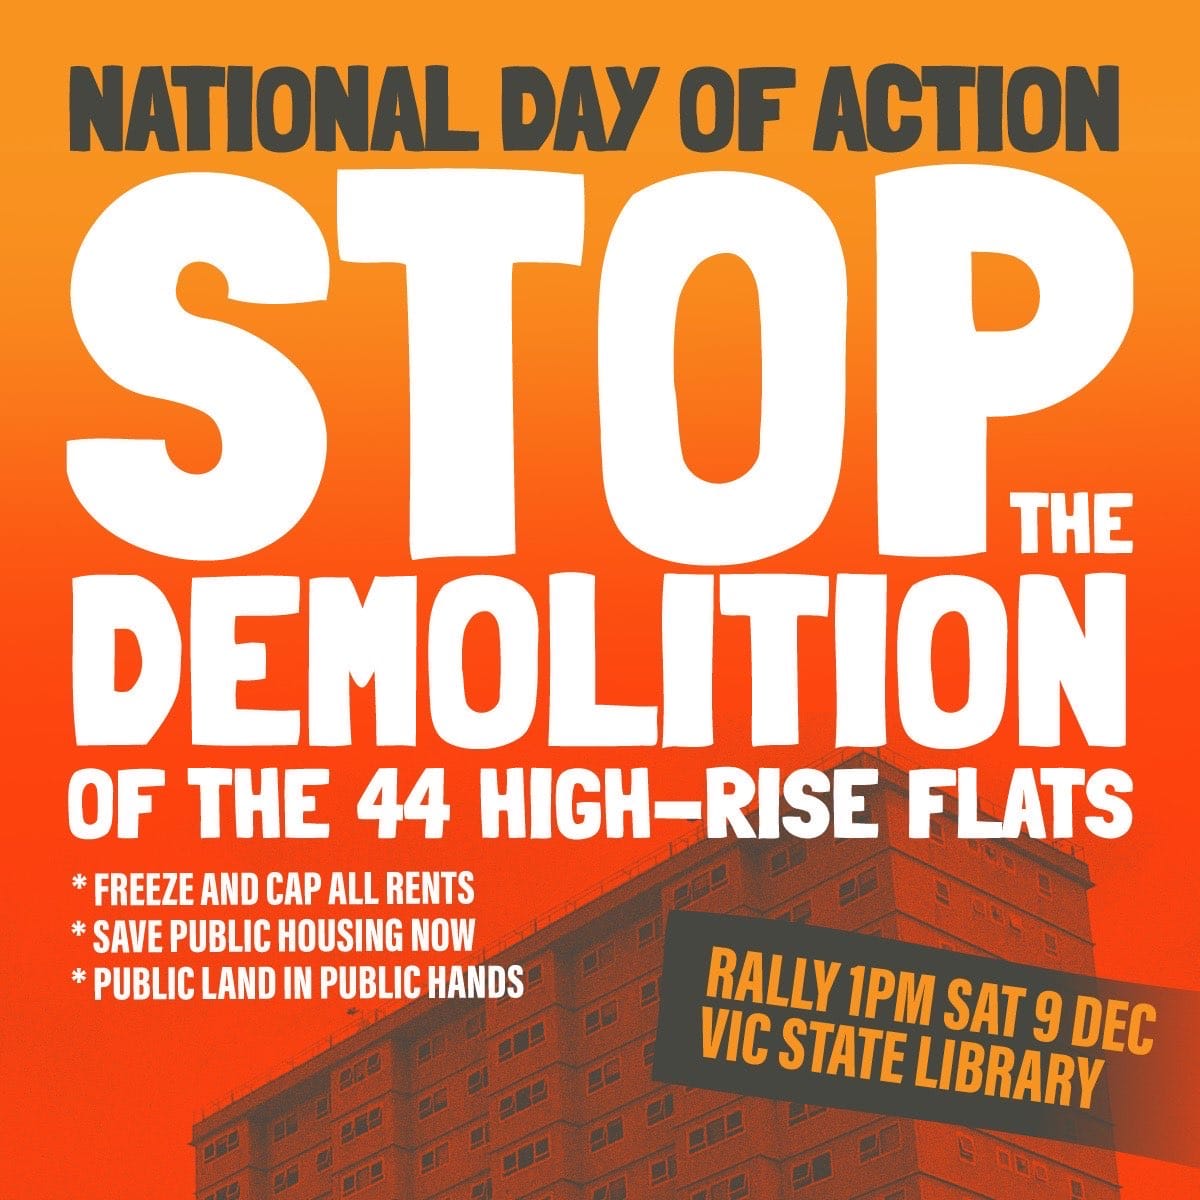 A flyer advertising the National Day of Action to Stop the Demolition of the 44 High-Rise Flats. The flyer calls for a freeze and cap on all rents, to save public housing now, and for public housing to remain in public hands. The rally will be held at 1PM outside the State Library of Victoria. The text of the image is overlaid on an orange-gradient background with a photo of one of the high-rise towers.